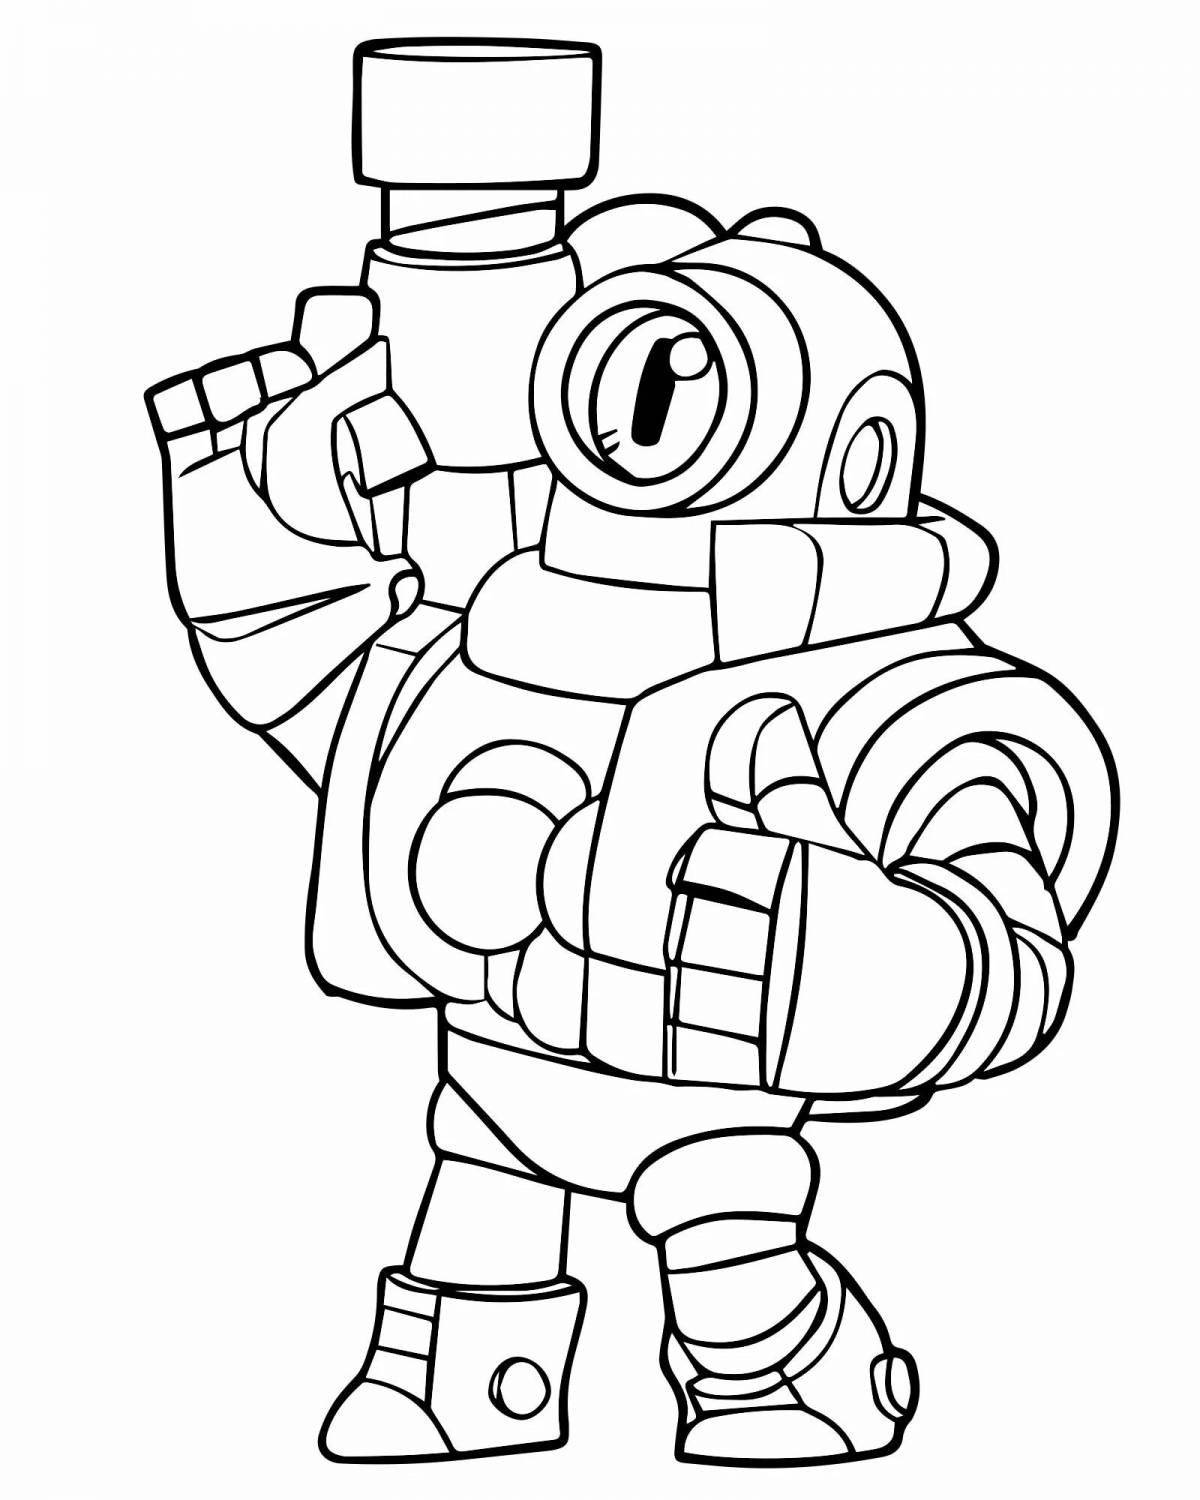 Braver stars coloring pages for kids